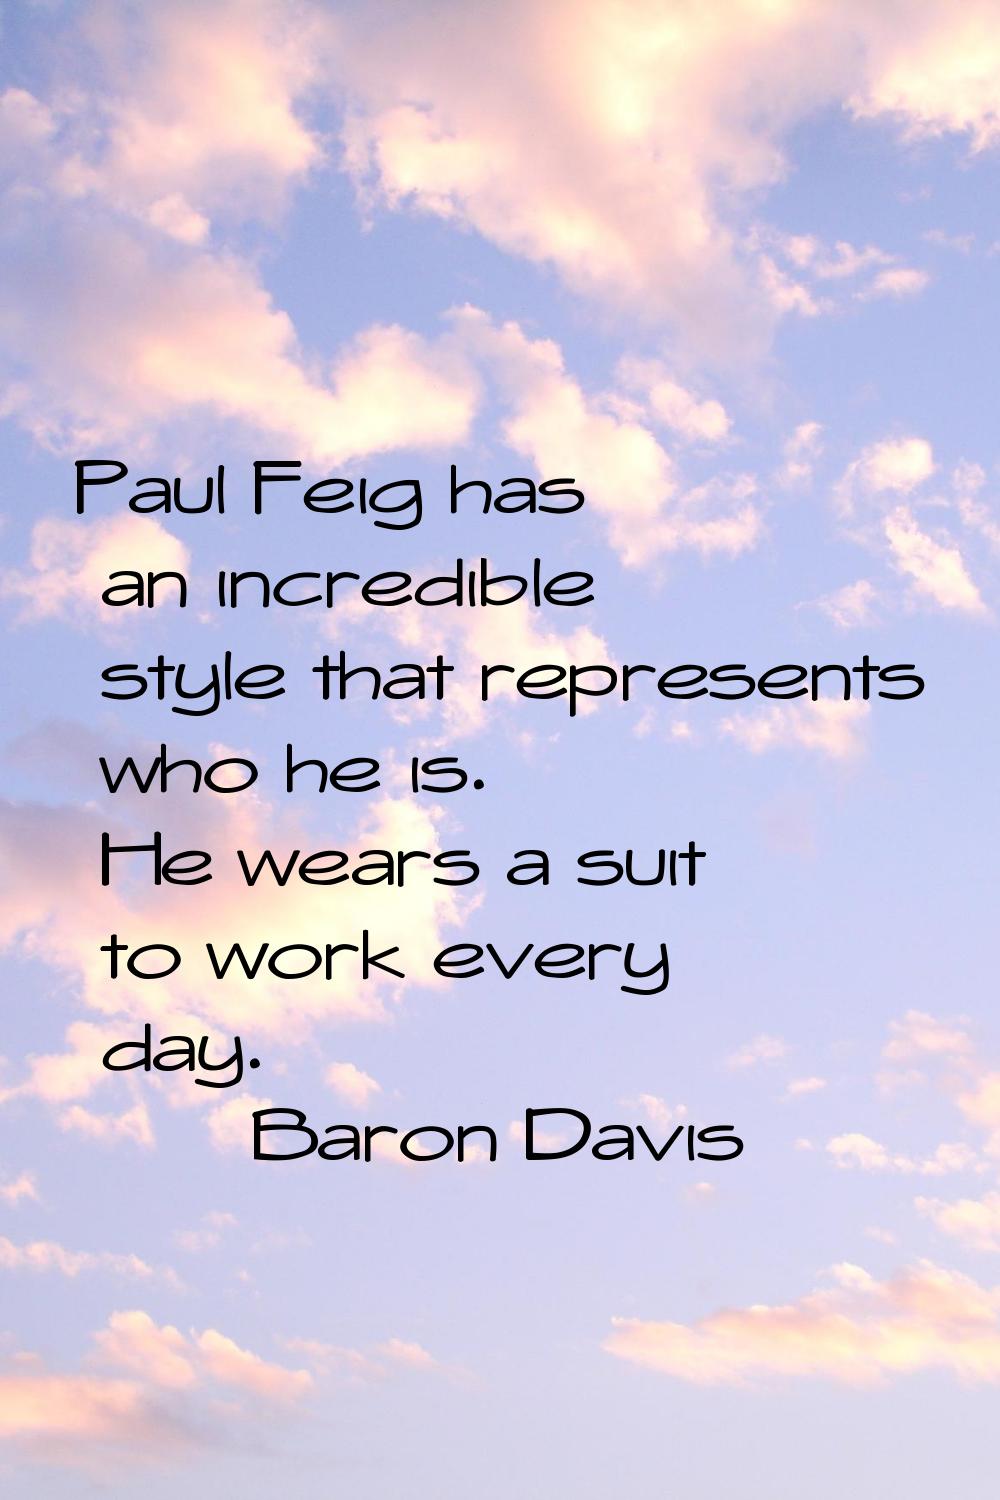 Paul Feig has an incredible style that represents who he is. He wears a suit to work every day.